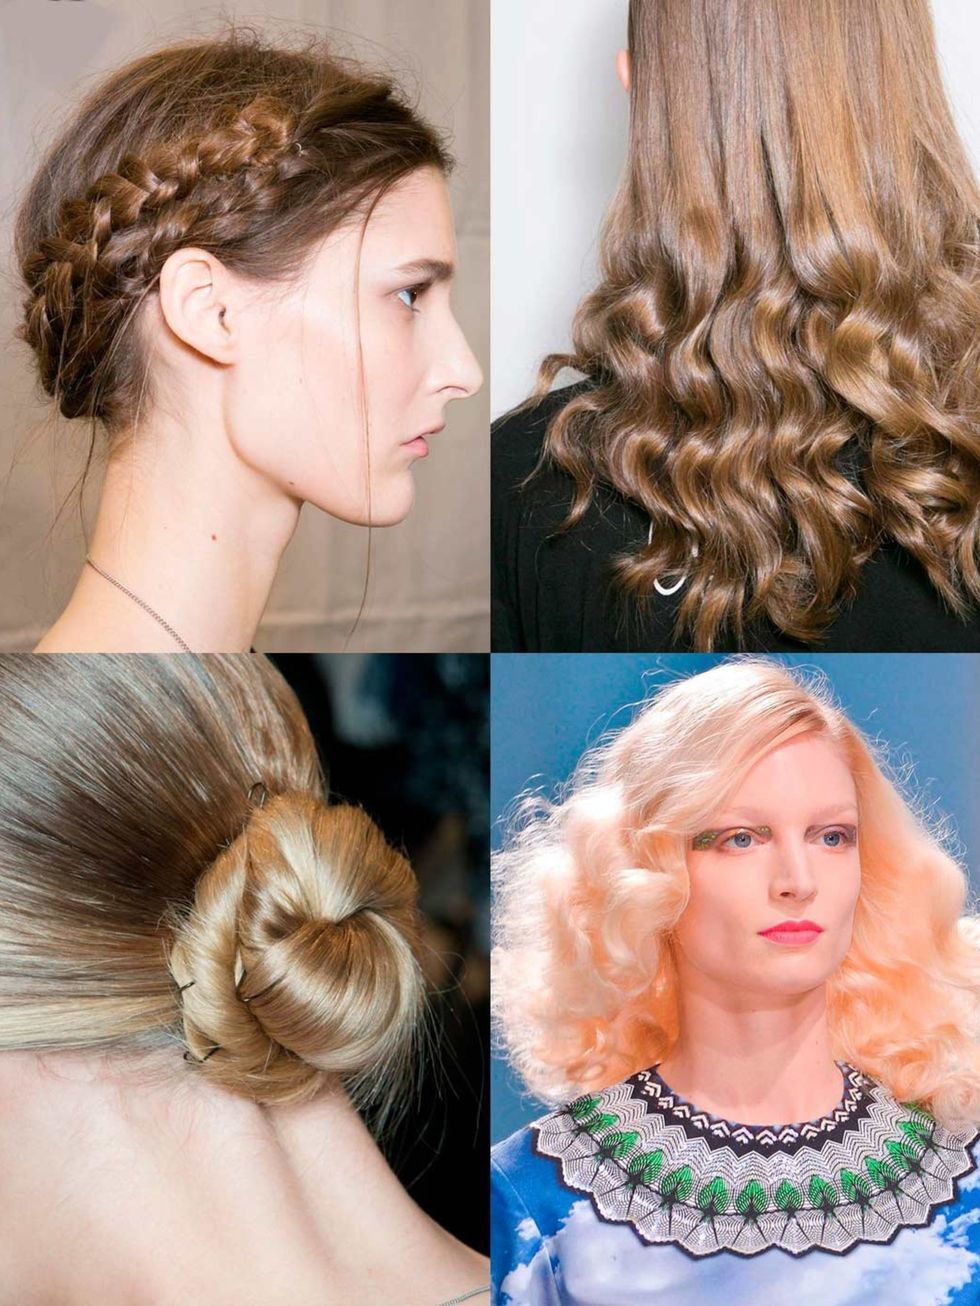 &lt;p&gt;From waves and braids to twists and buns Paris Fashion Week dealt us a veritable feast of hairstyling ideas.&lt;/p&gt;&lt;p&gt;We just don&#039;t know which one to try first...&lt;/p&gt;&lt;p&gt;&lt;em&gt;See the best hair looks from &lt;a href=&